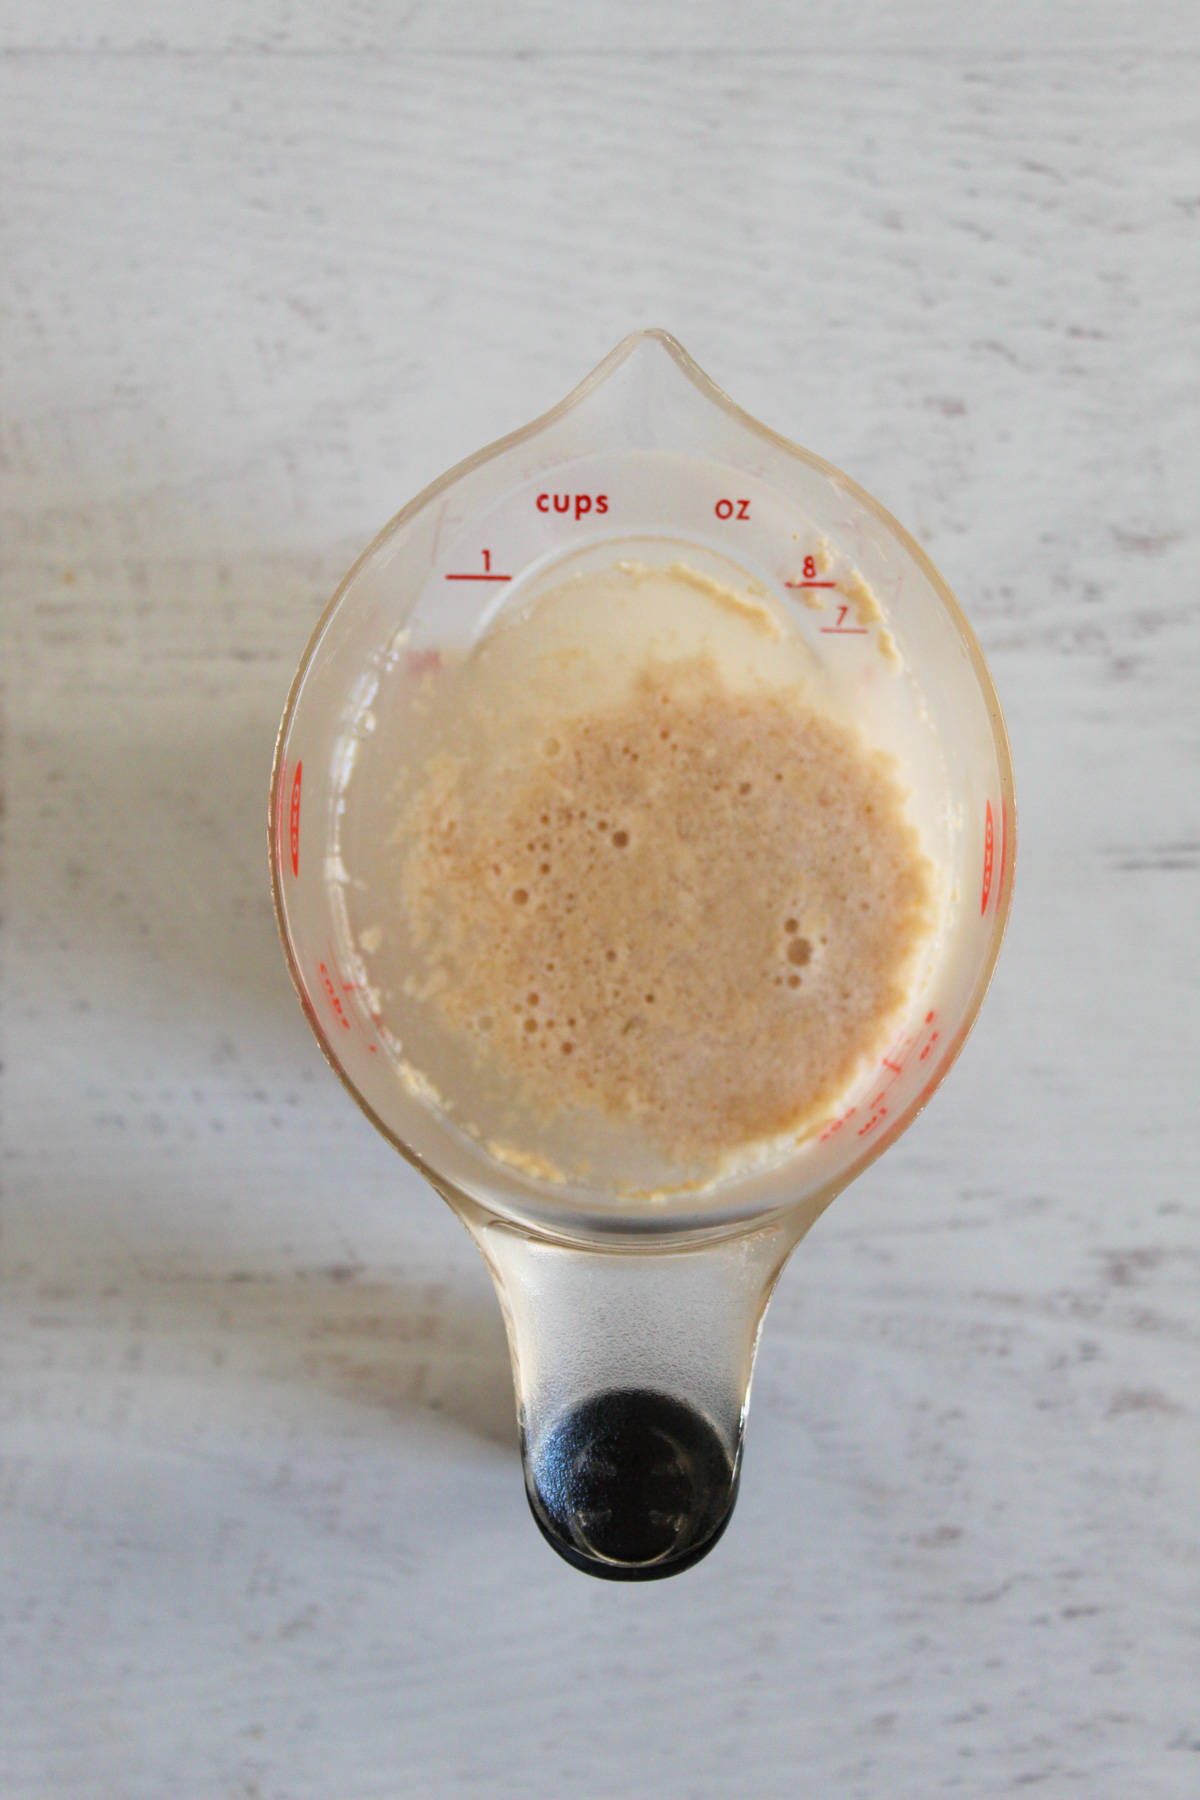 yeast proofing in a cup